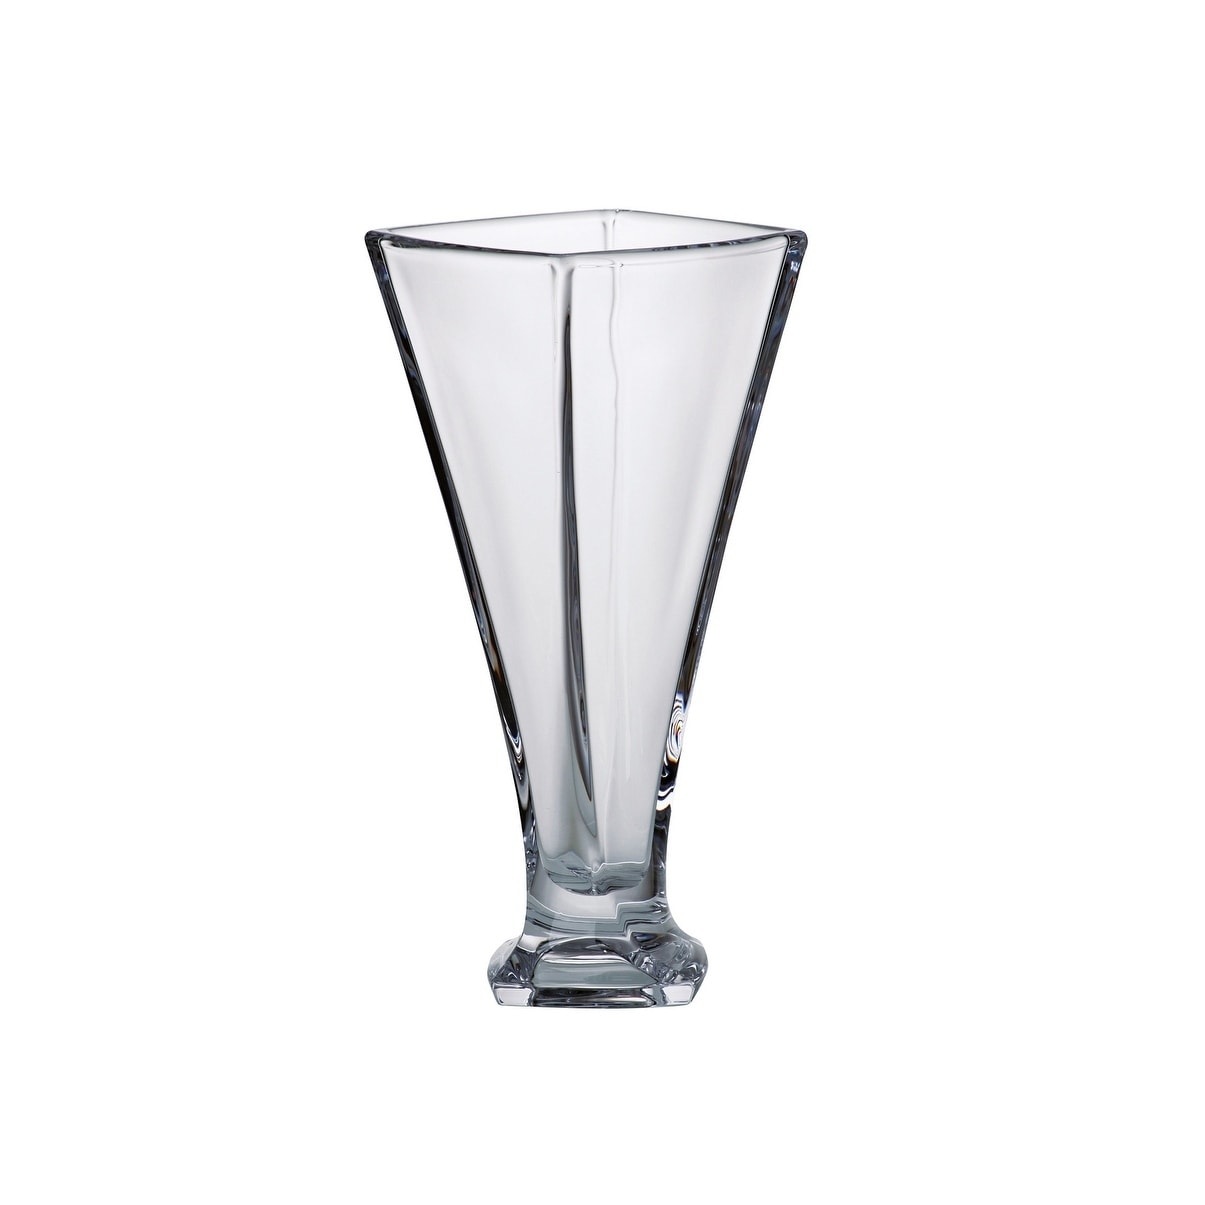 Majestic Gifts European Glass -Crystalline - Footed Vase with a Twist - 11.15"height x 5.1"length x 5.1"width